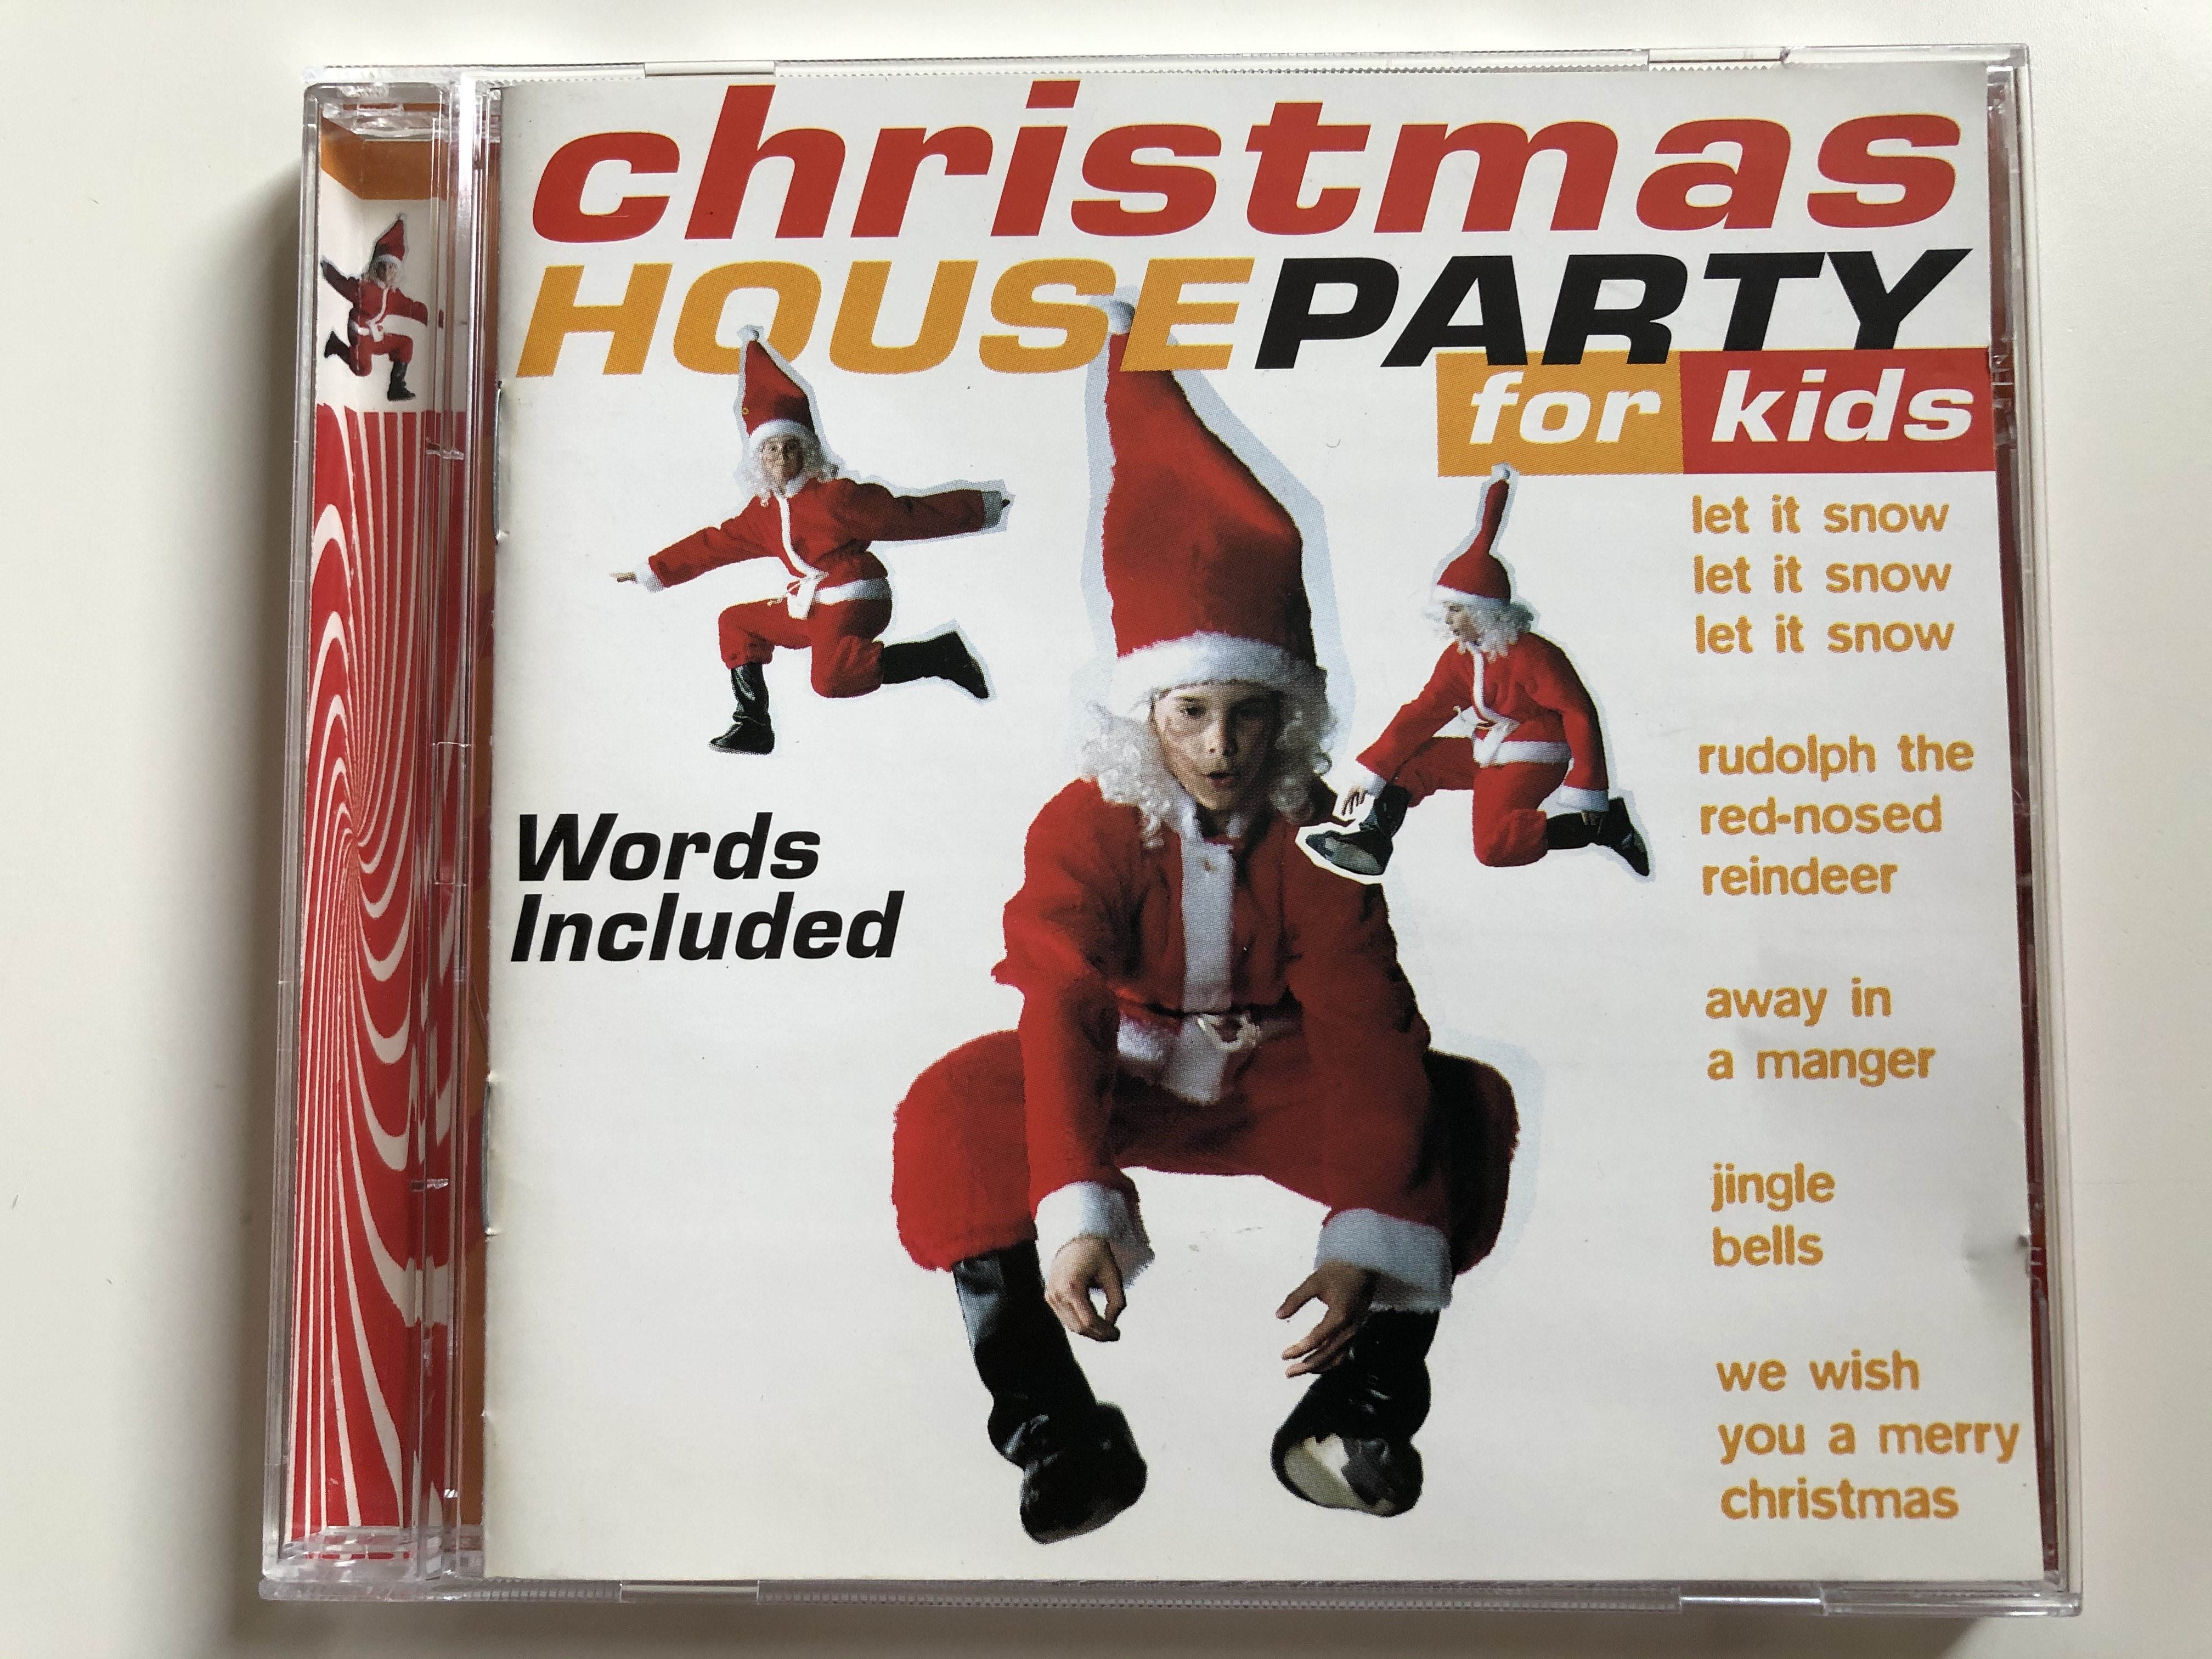 christmas-houseparty-for-kids-words-included-let-it-snow-let-it-snow-rudolph-the-red-nosed-reindeer-away-in-a-manger-jingle-bells-we-wish-you-a-merry-christmas-disky-audio-cd-1997-ki-1-.jpg